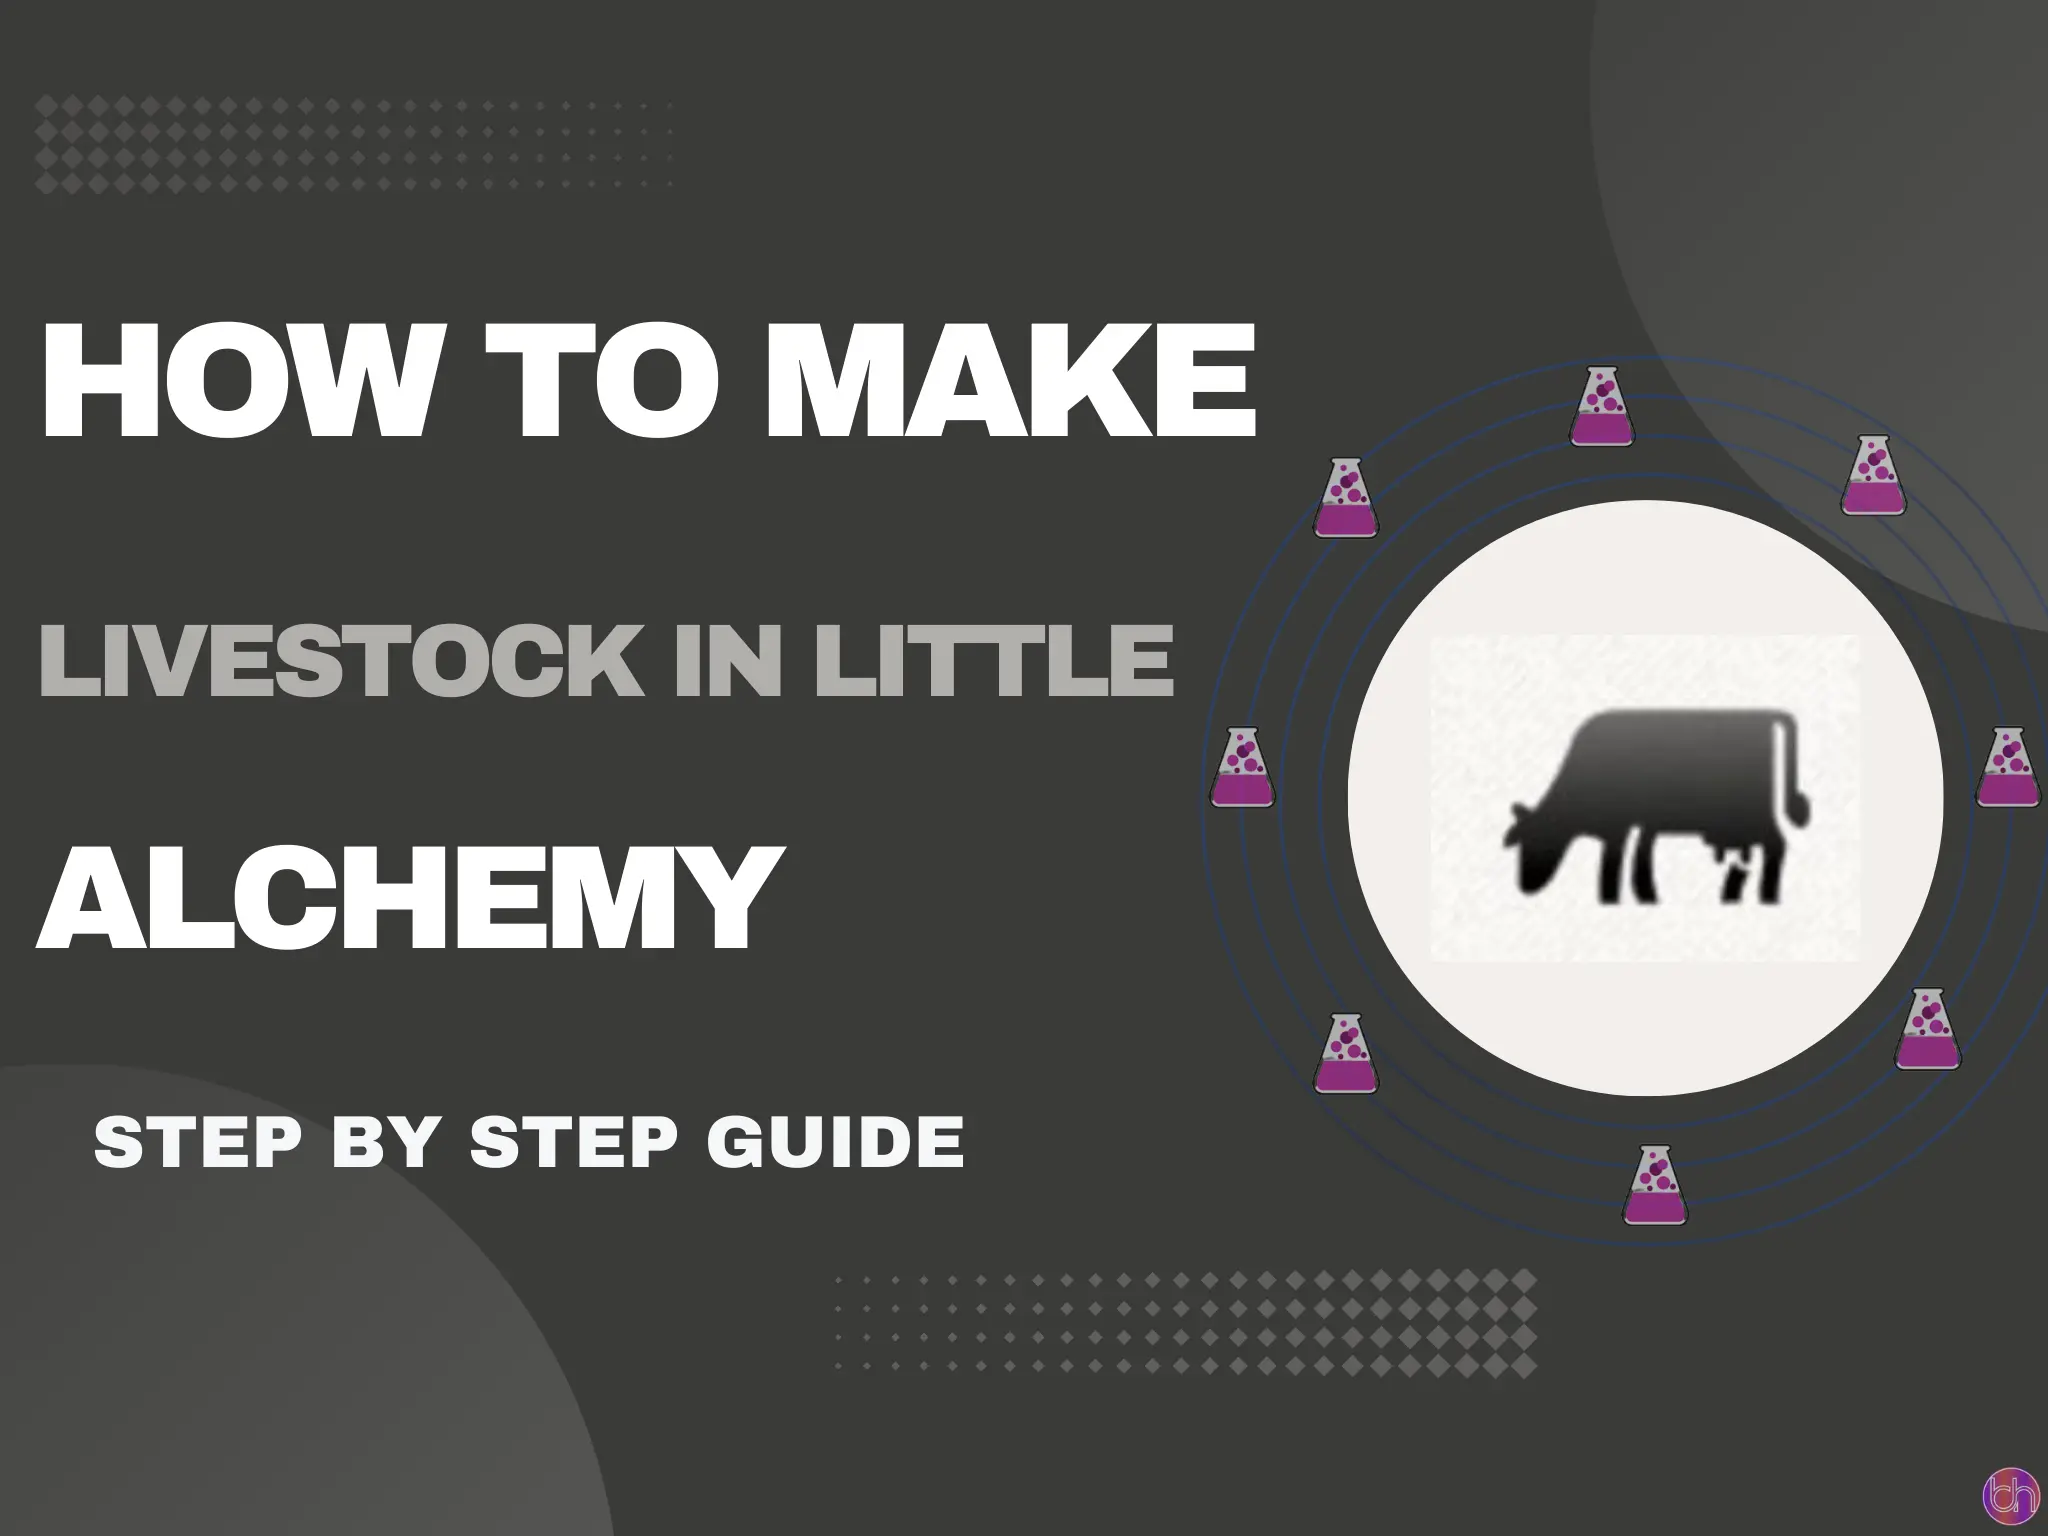 How to make Livestock in little alchemy